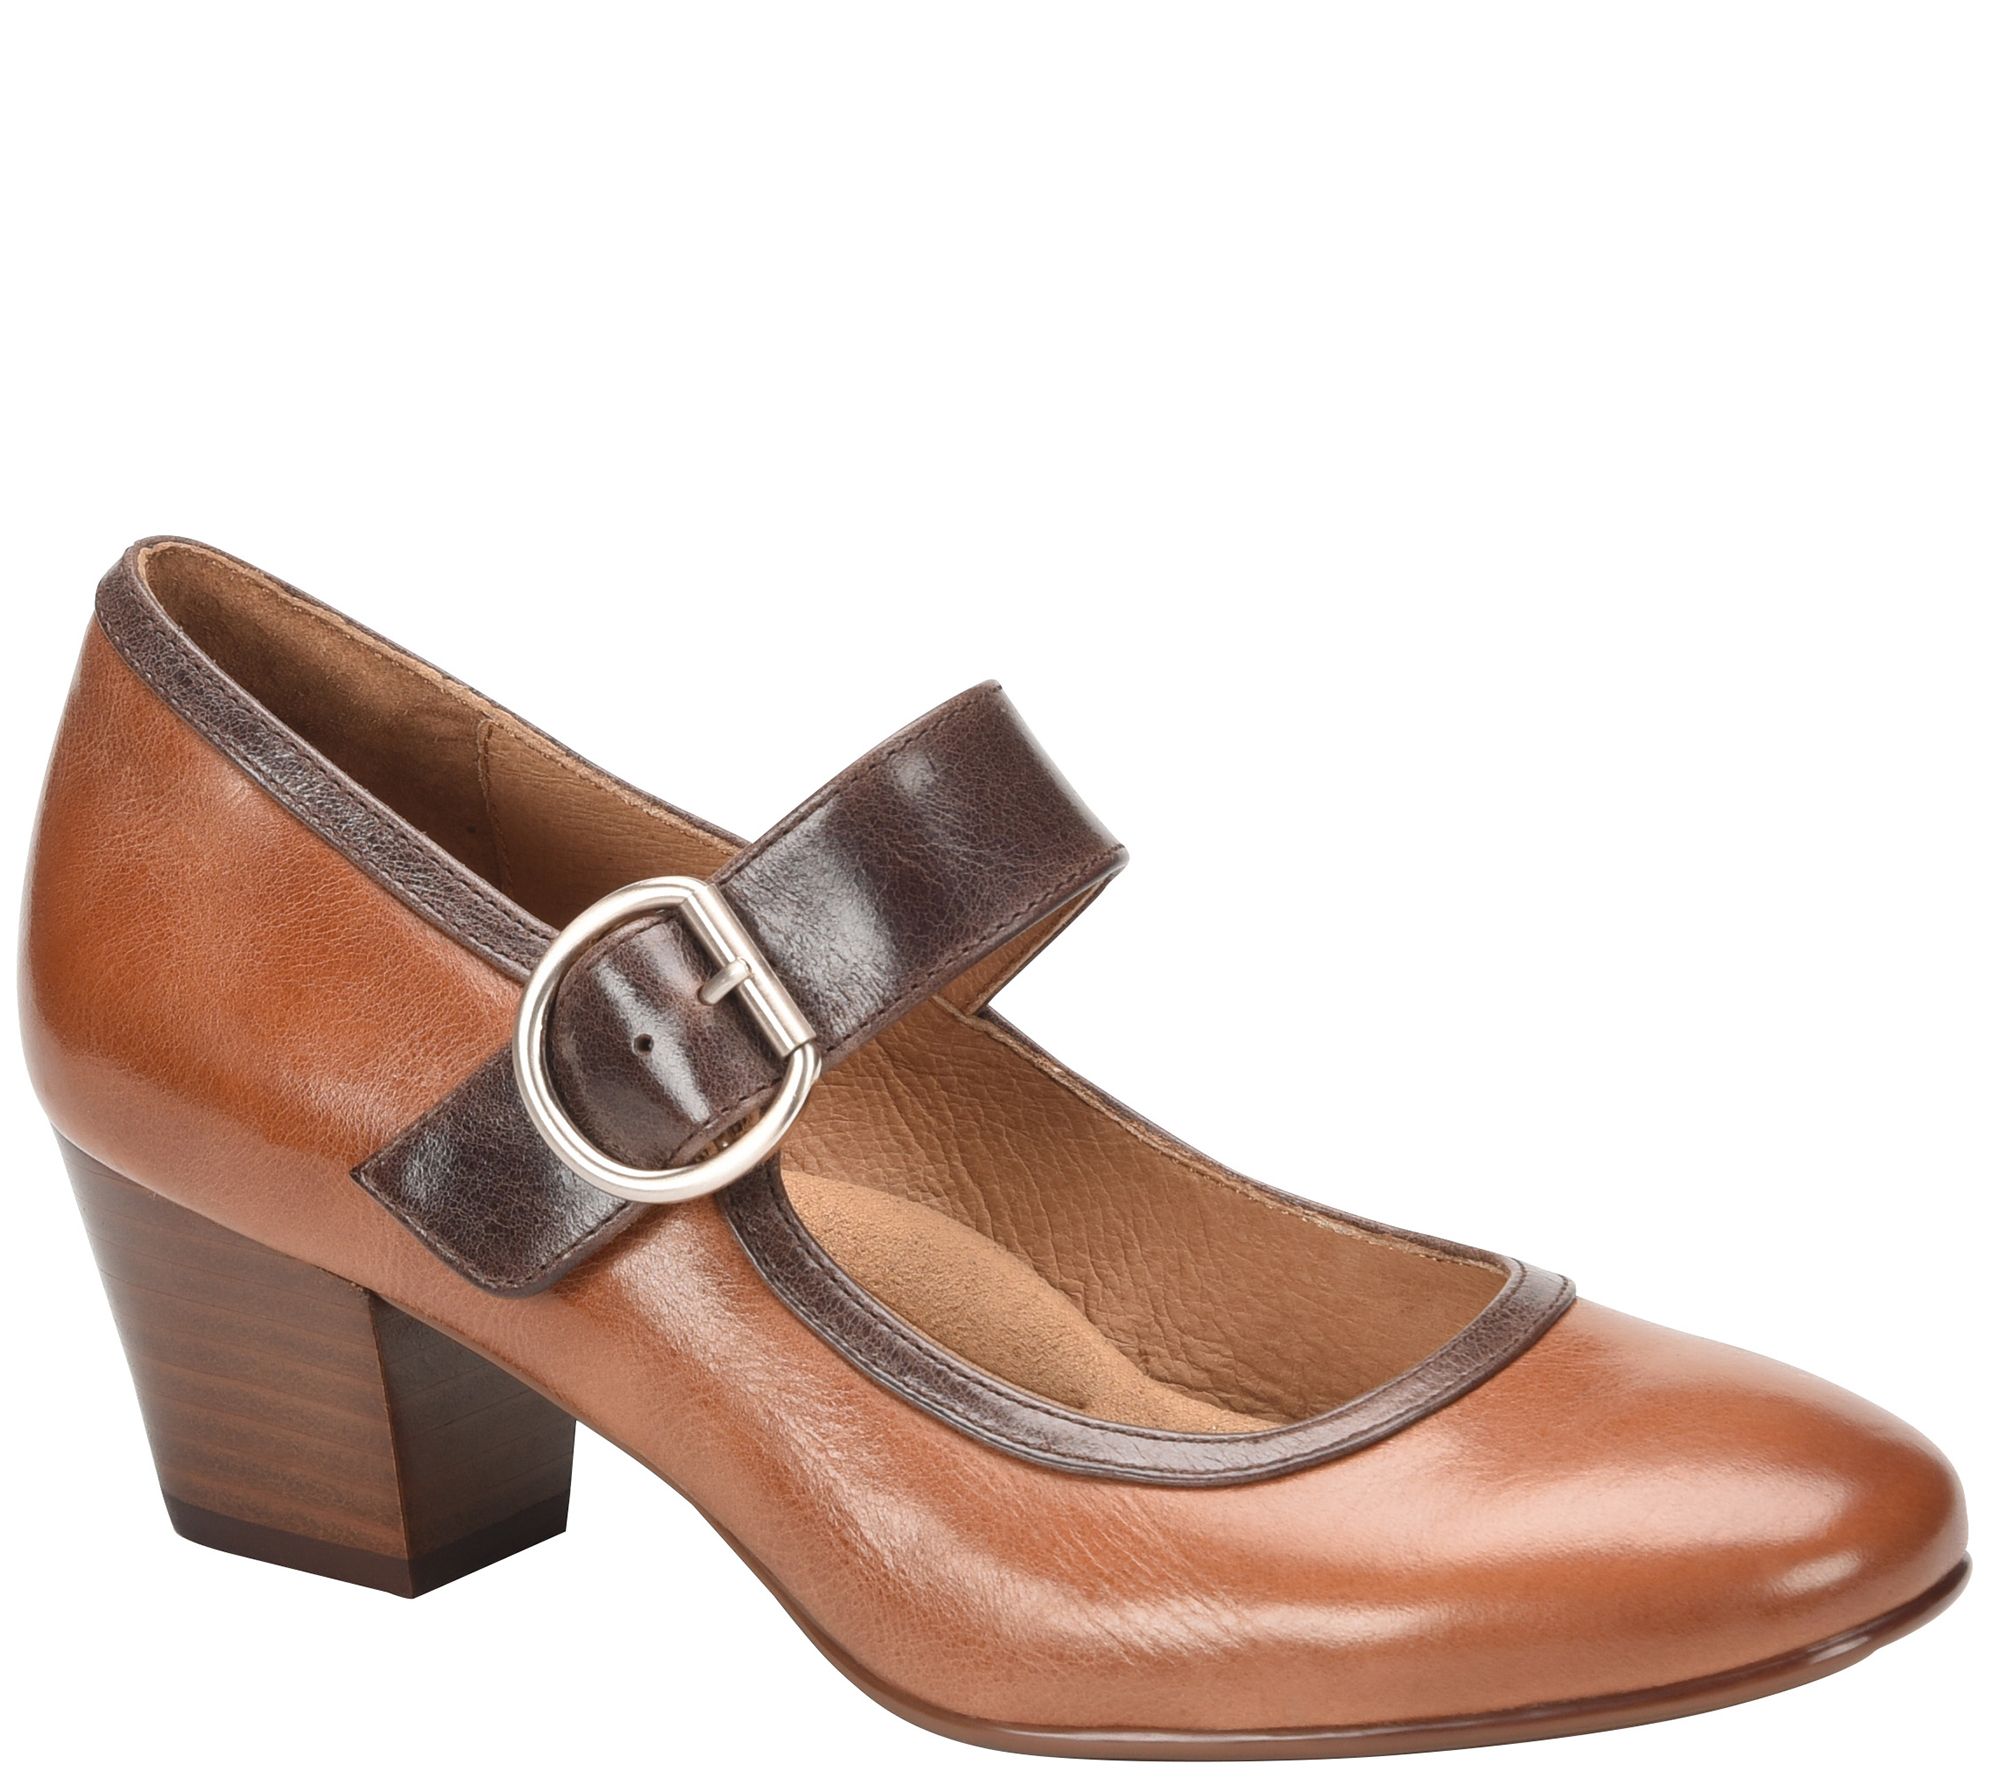 Sofft Mid-Height Heeled Mary Janes - Lorna - QVC.com